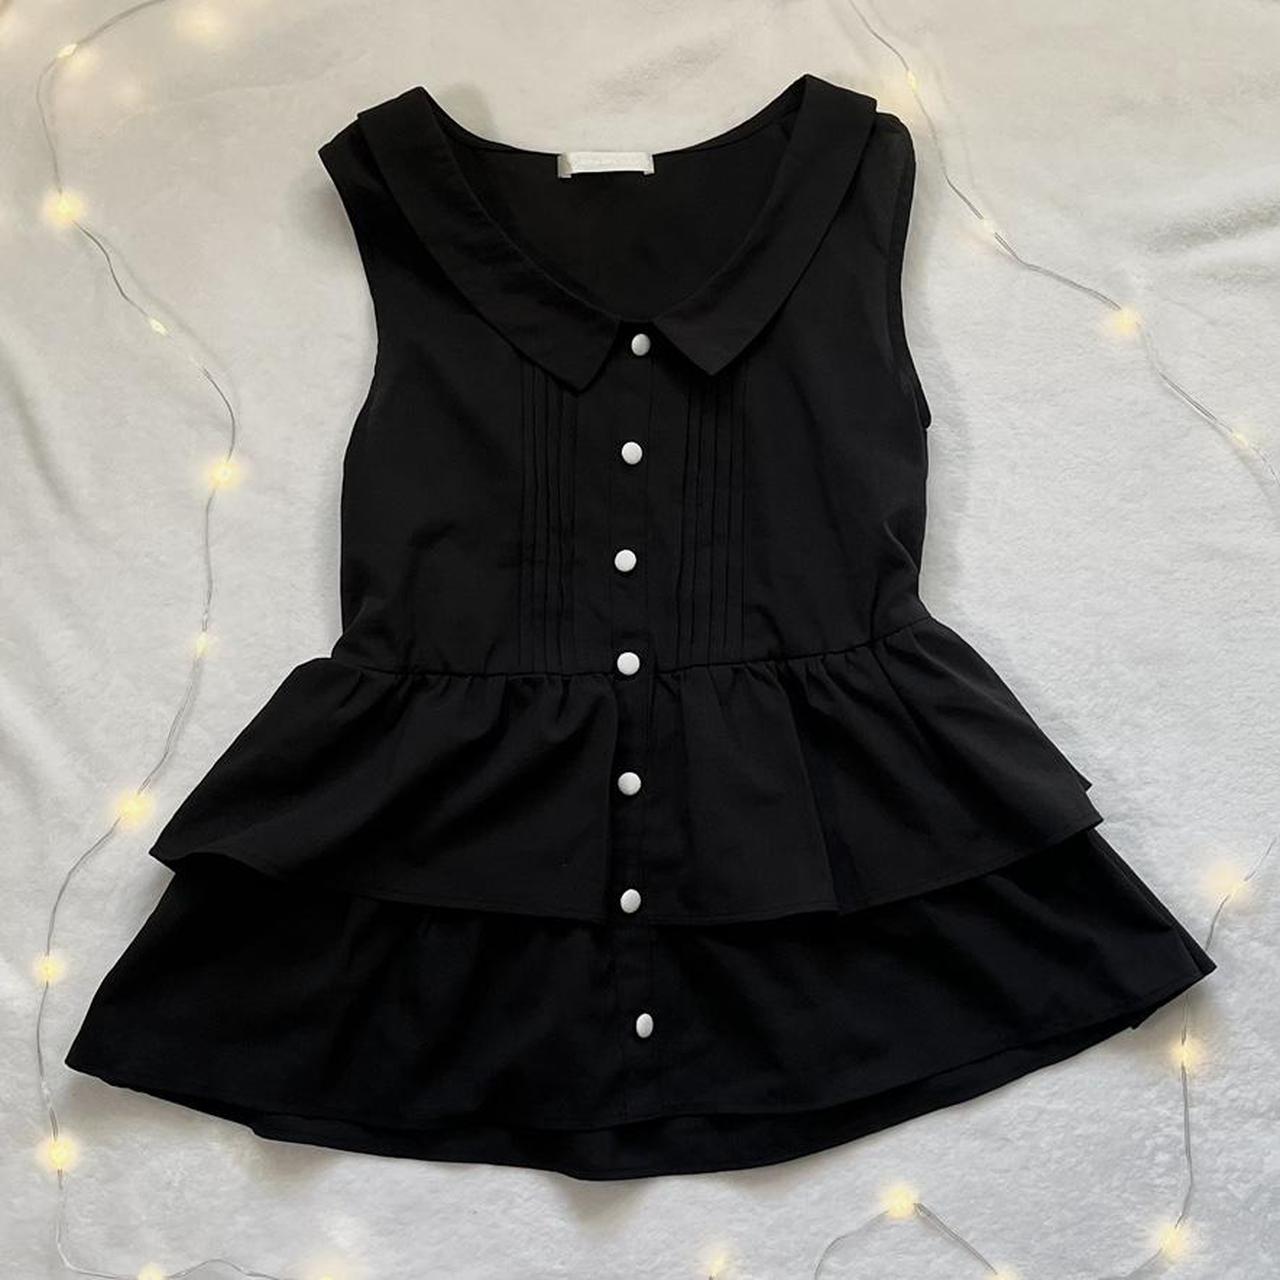 Black collar peplum button blouse ♡ imported from... - Depop